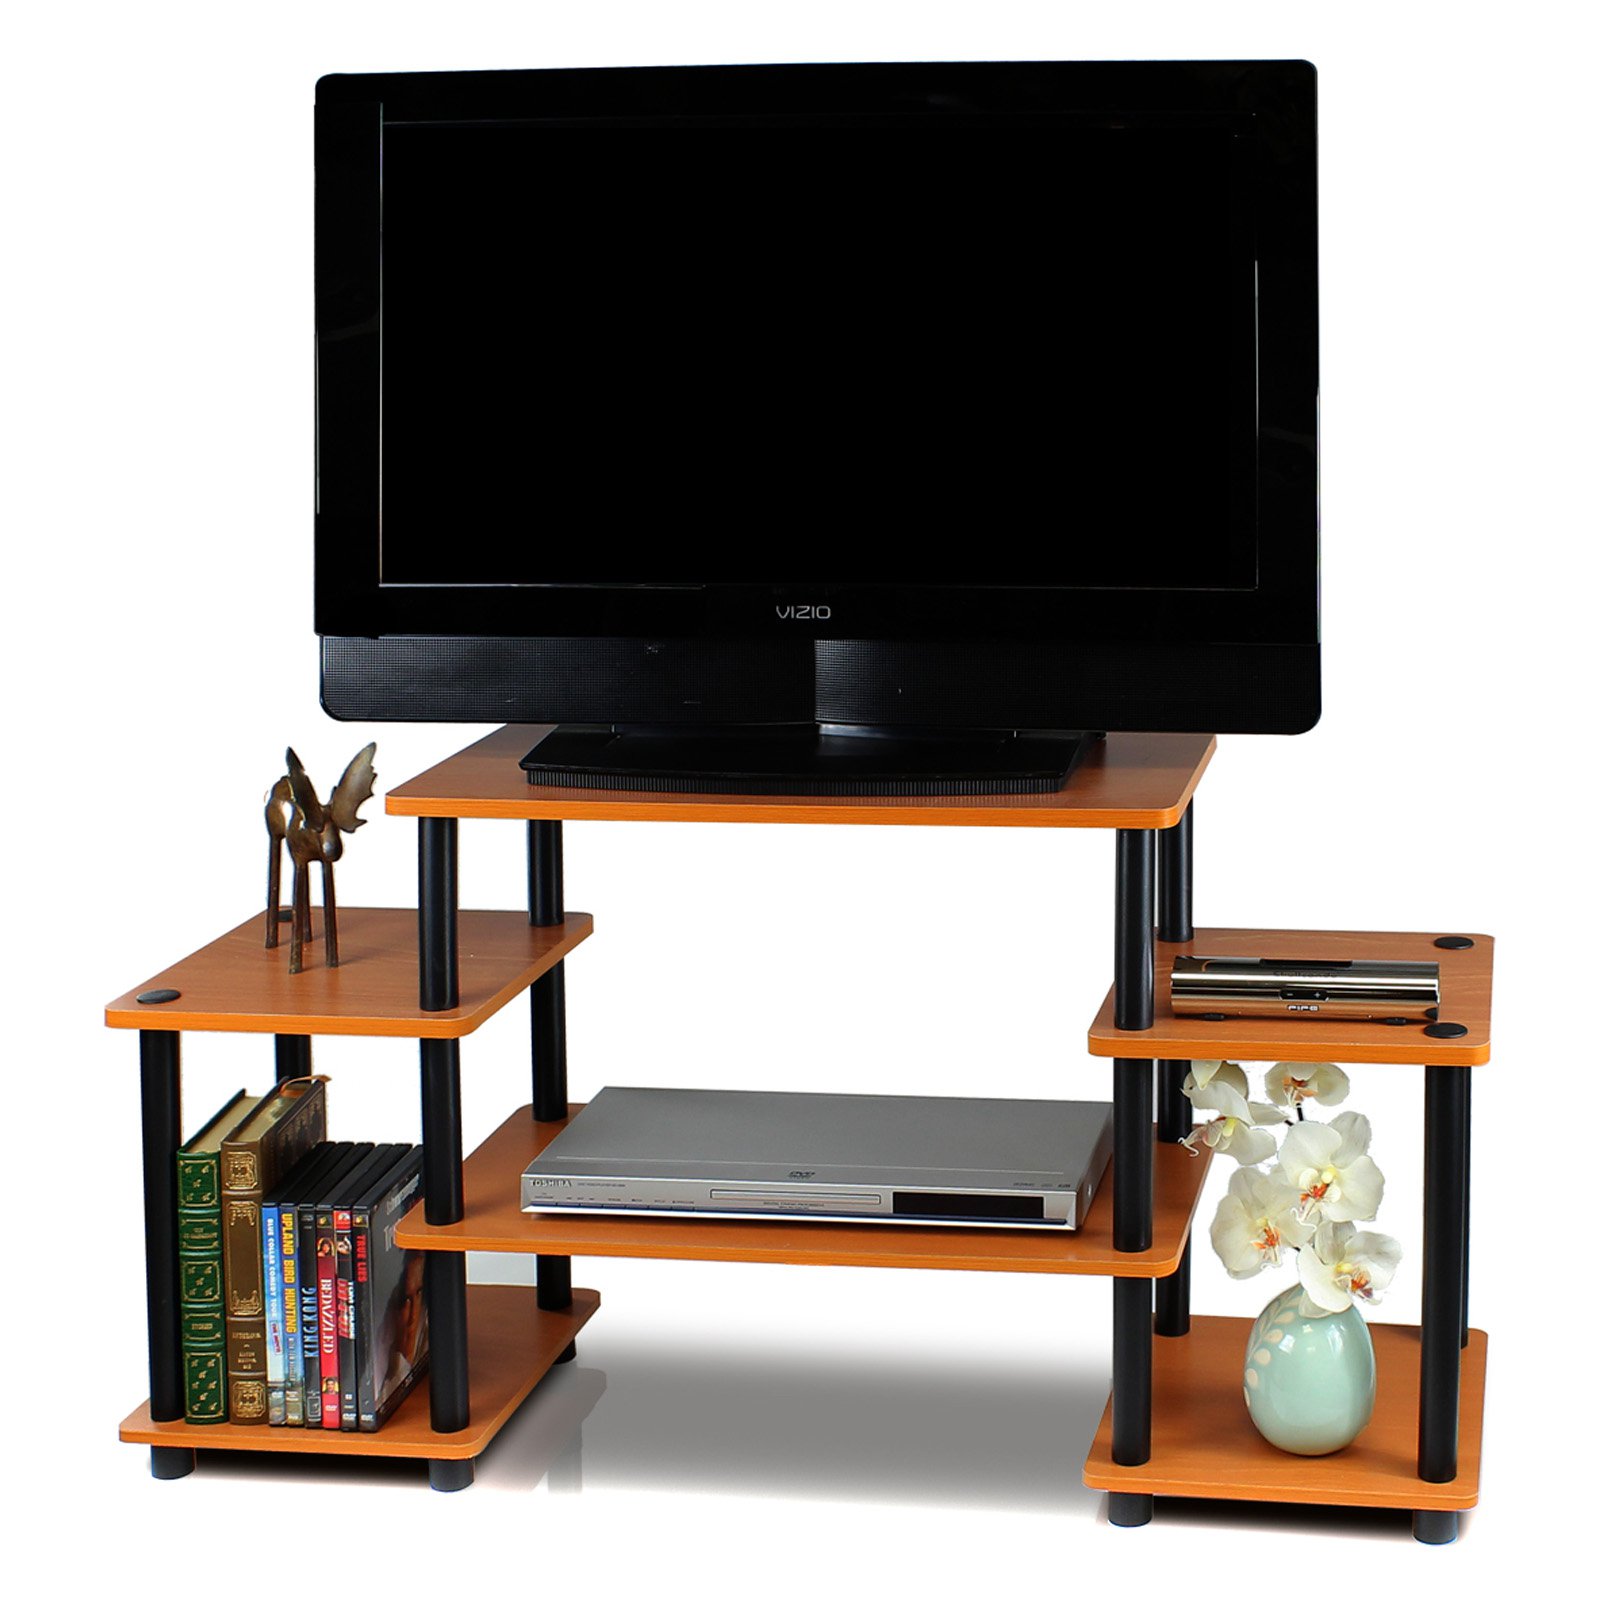 Furinno 11257 Turn-N-Tube TV Stand for up to 25 TV - image 4 of 5